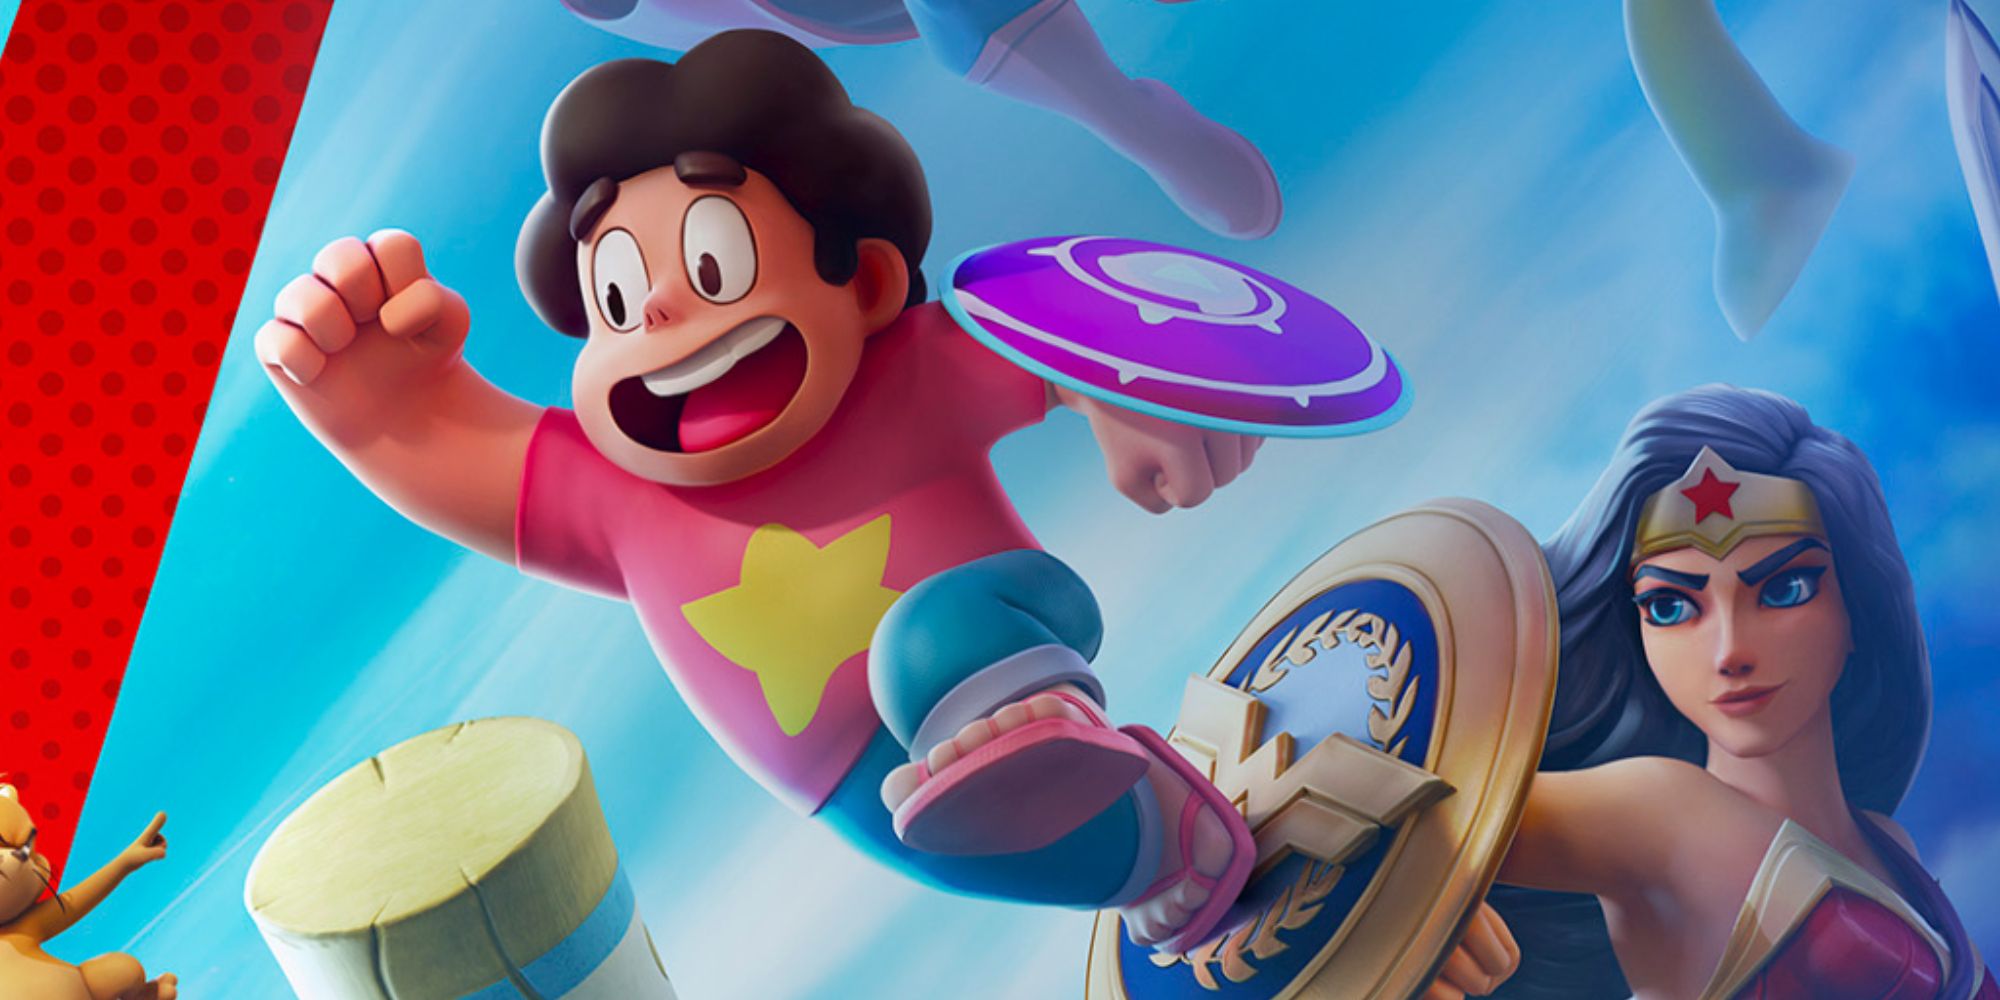 Steven Universe leaping off Wonder Woman's shield in the official banner for MultiVersus